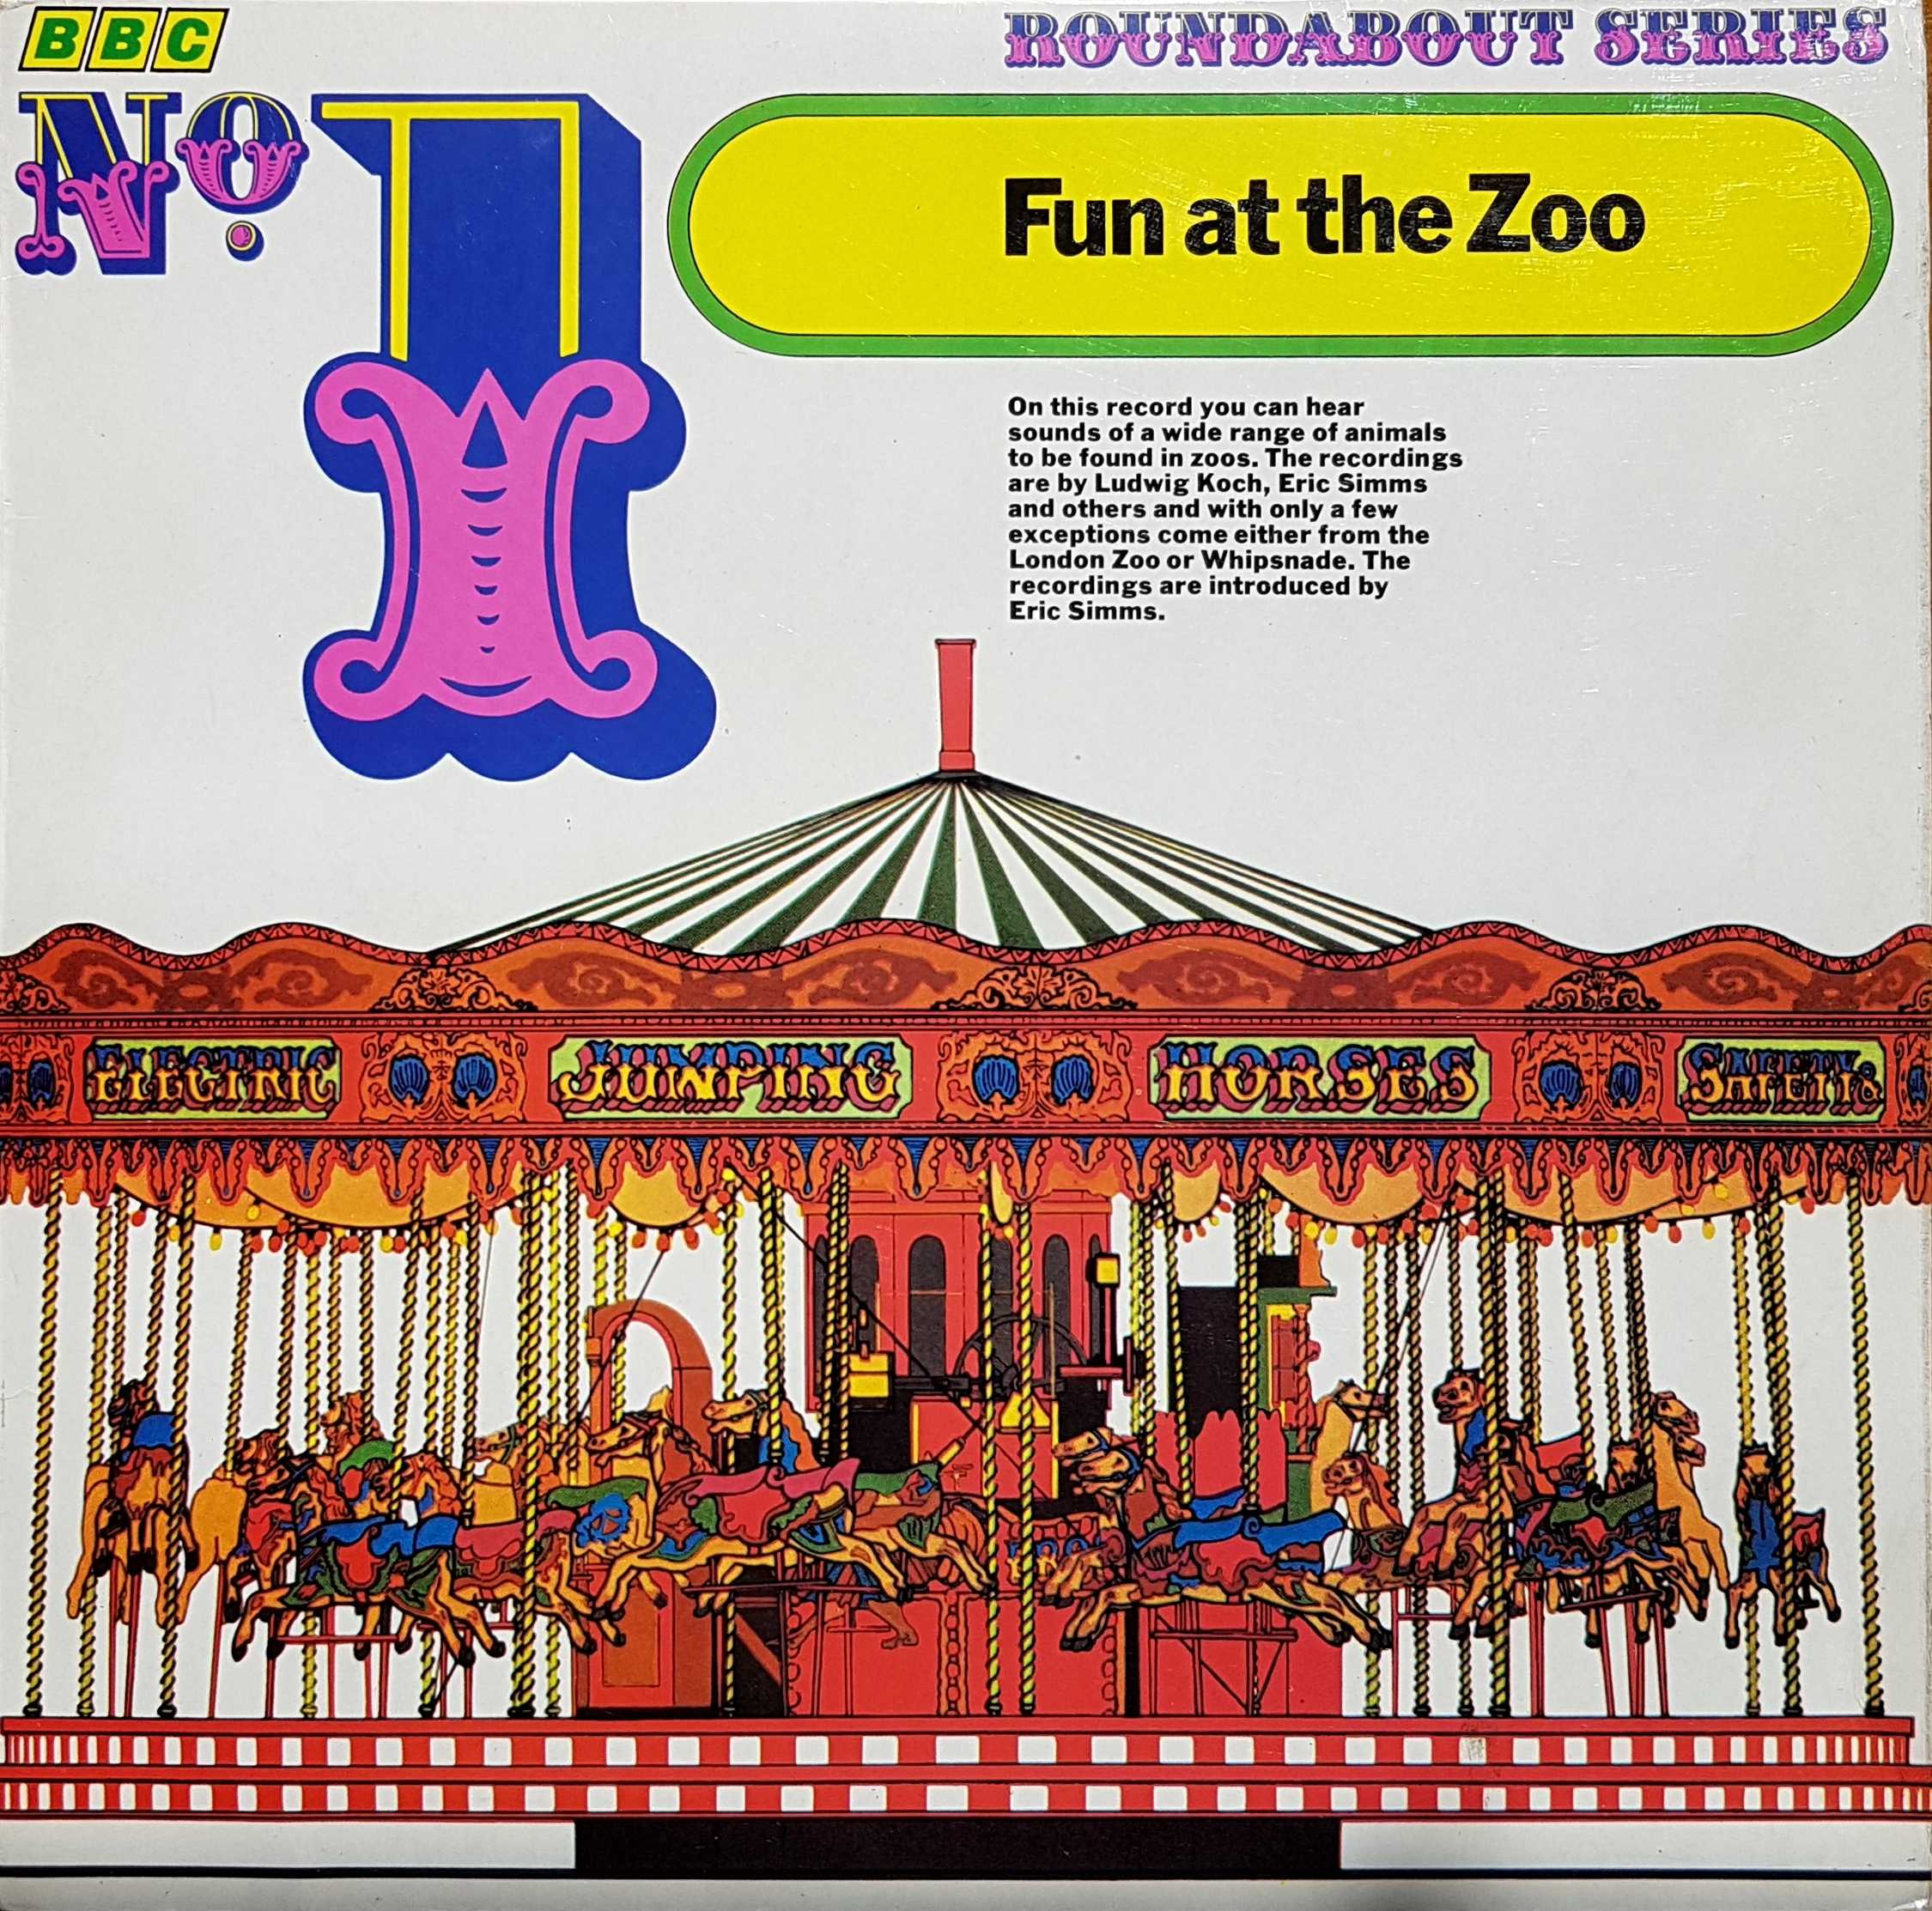 Picture of RBT 1 Fun at the zoo- Sound effects by artist Various from the BBC albums - Records and Tapes library